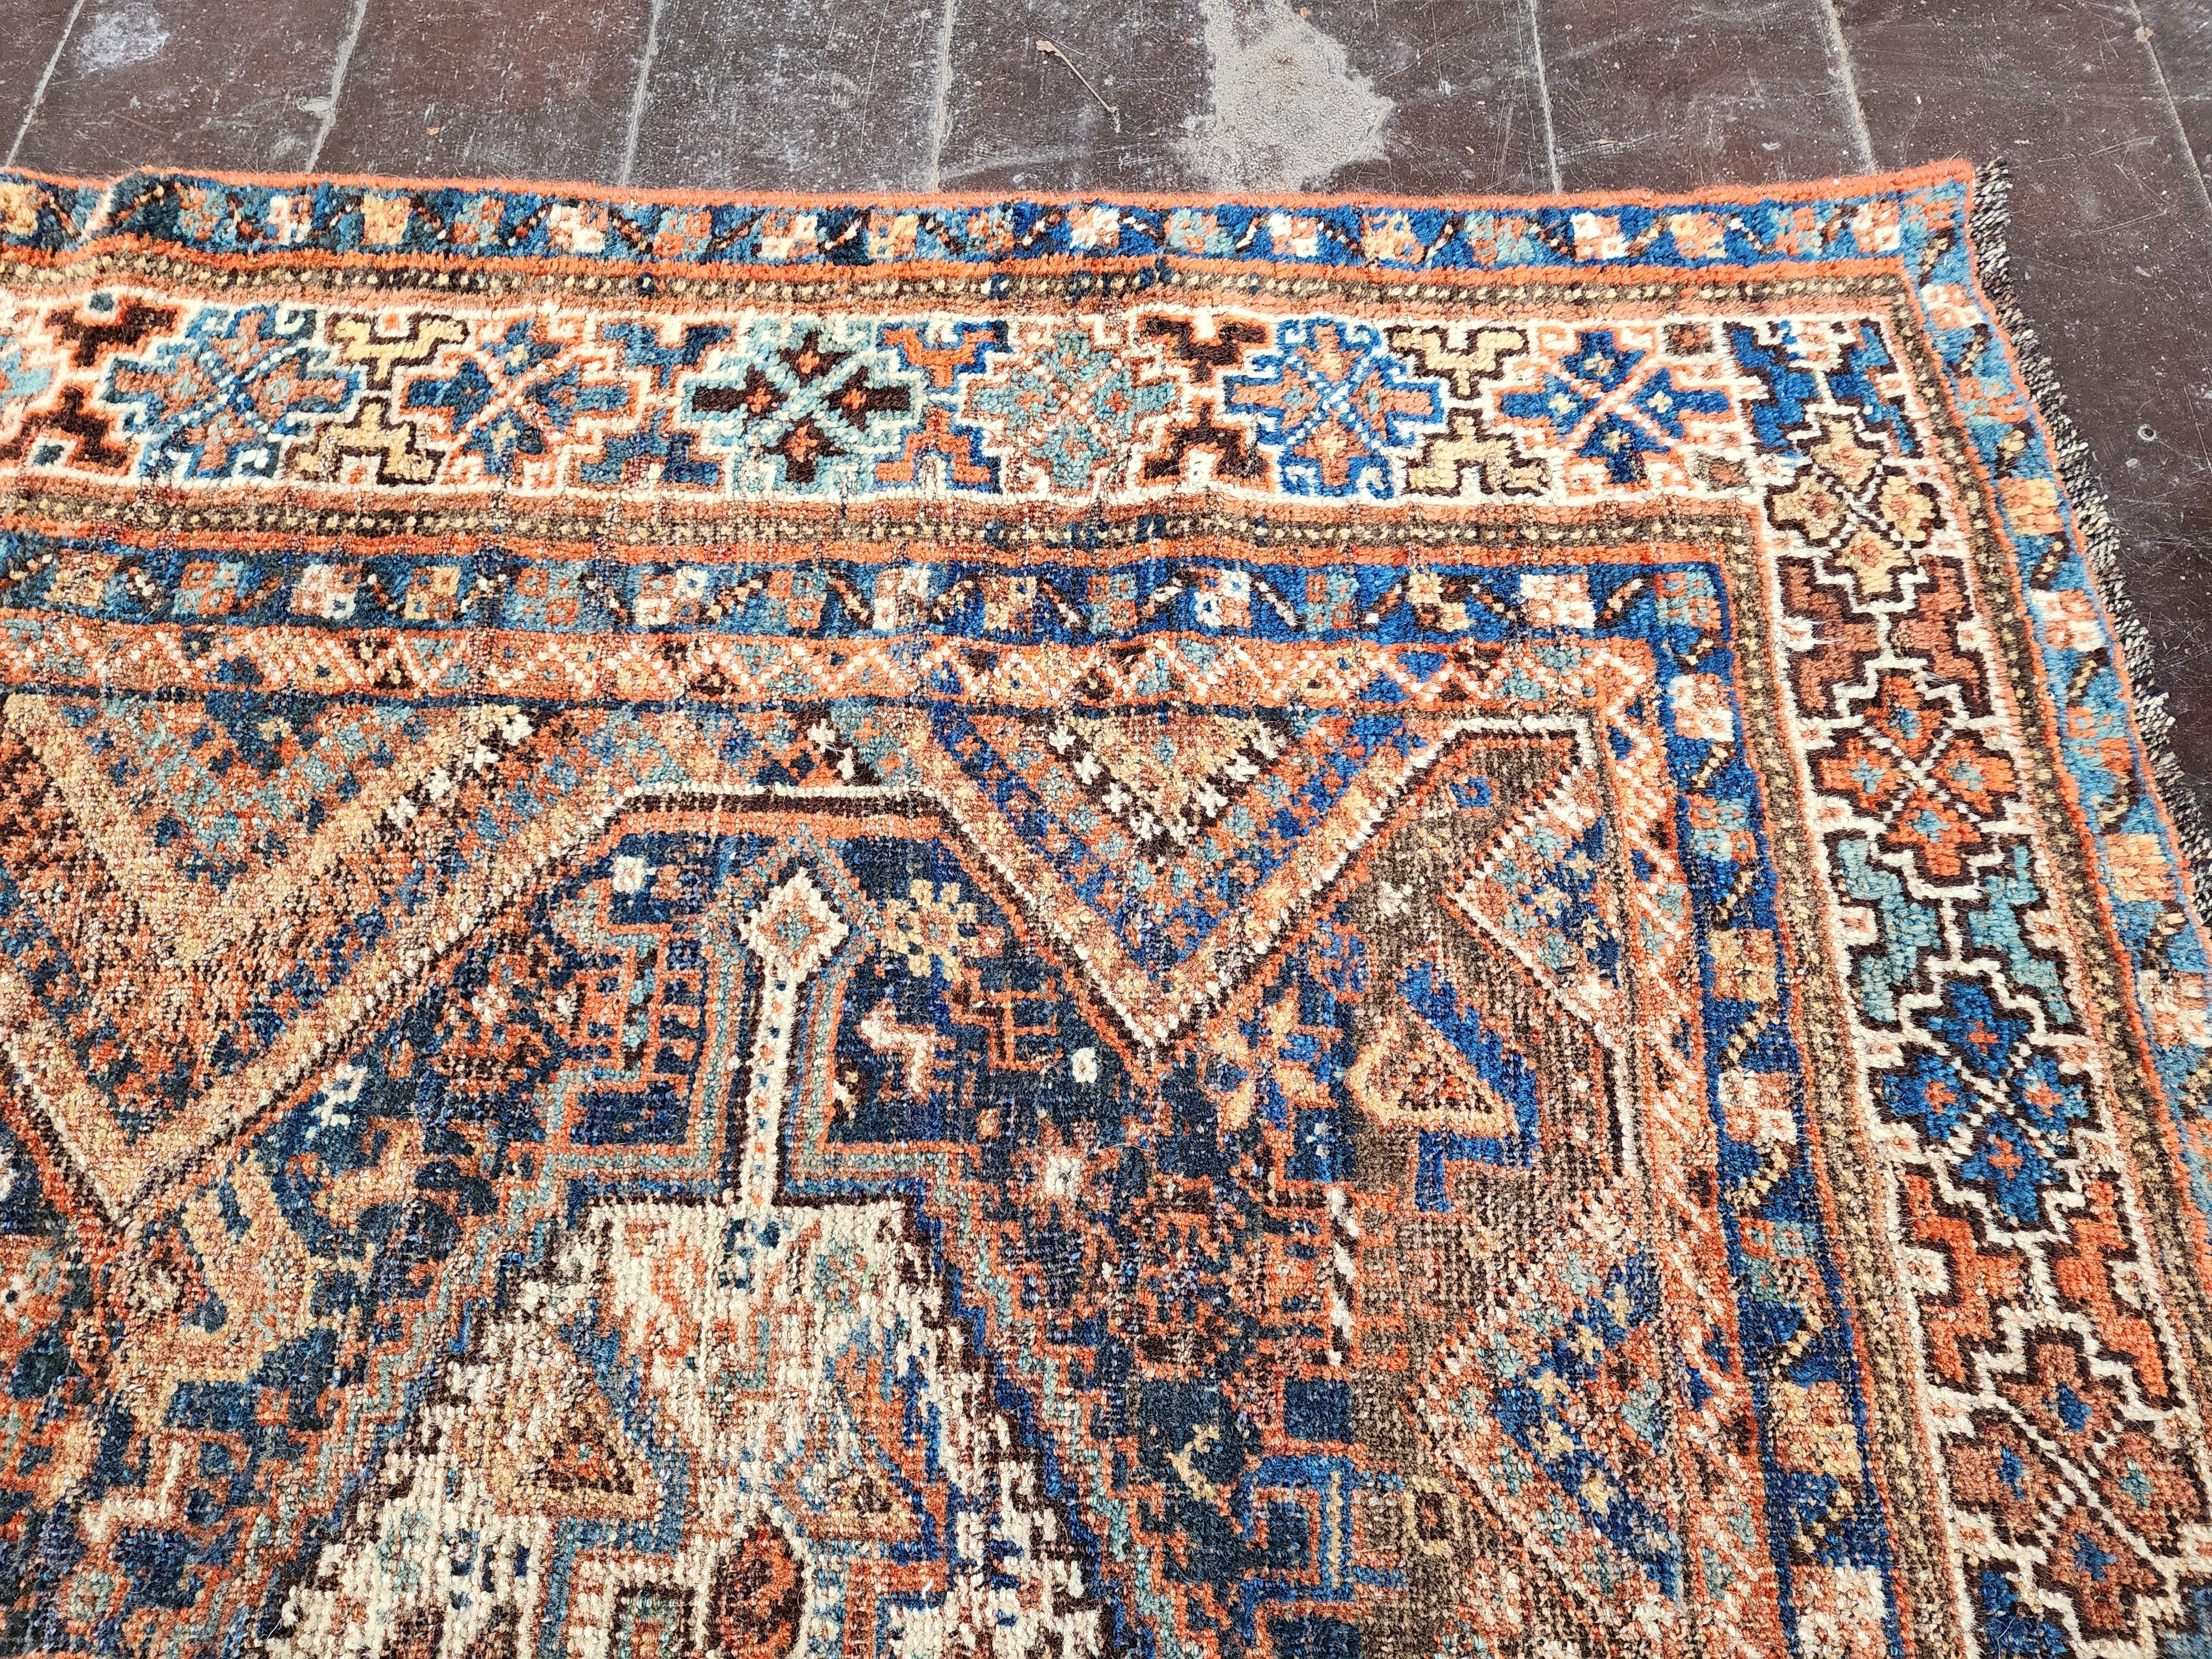 Blue and Brown Antique Persian Area Rug 5 x 4 ft Vintage Turkish Tribal Natural Wool Rug, Recycled Oriental Design Rustic Bohemian Floor Rug